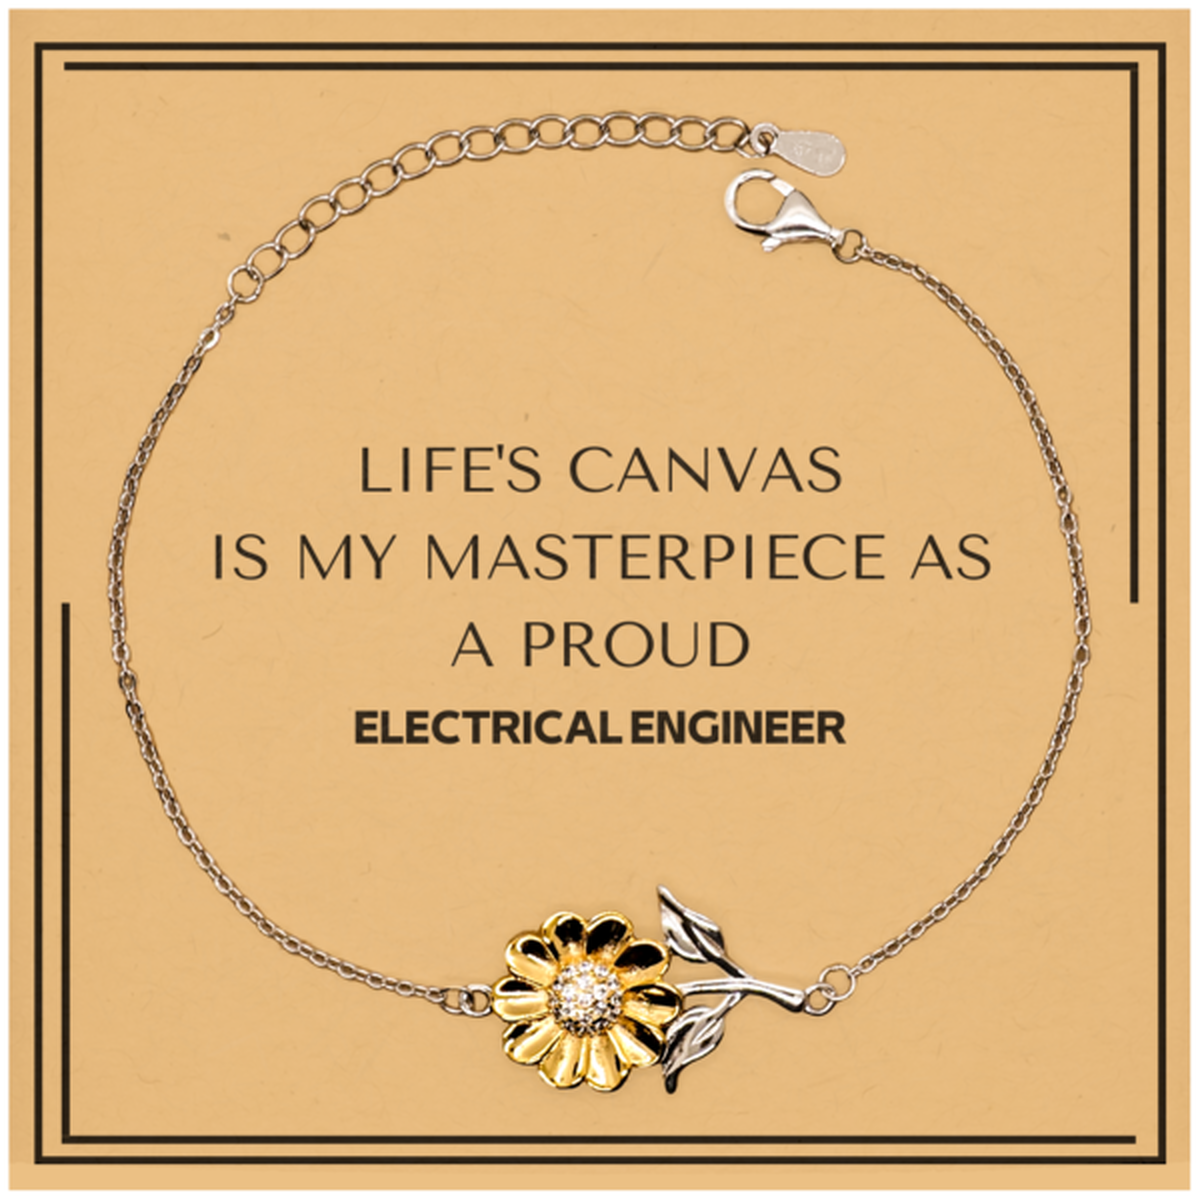 Proud Electrical Engineer Gifts, Life's canvas is my masterpiece, Epic Birthday Christmas Unique Sunflower Bracelet For Electrical Engineer, Coworkers, Men, Women, Friends